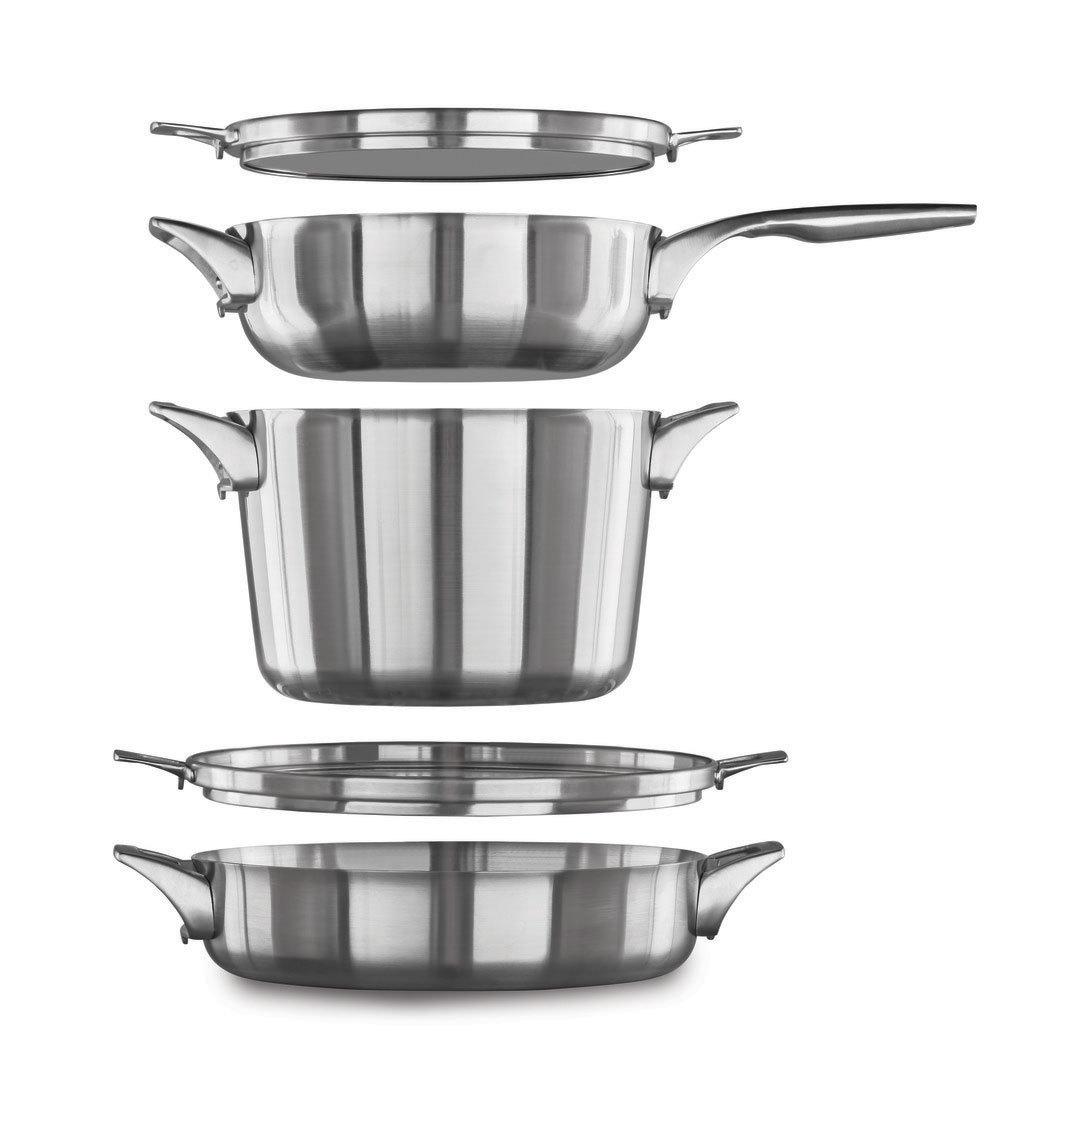 Calphalon Premier Space Saving Stainless Steel 3 Piece, 8-in